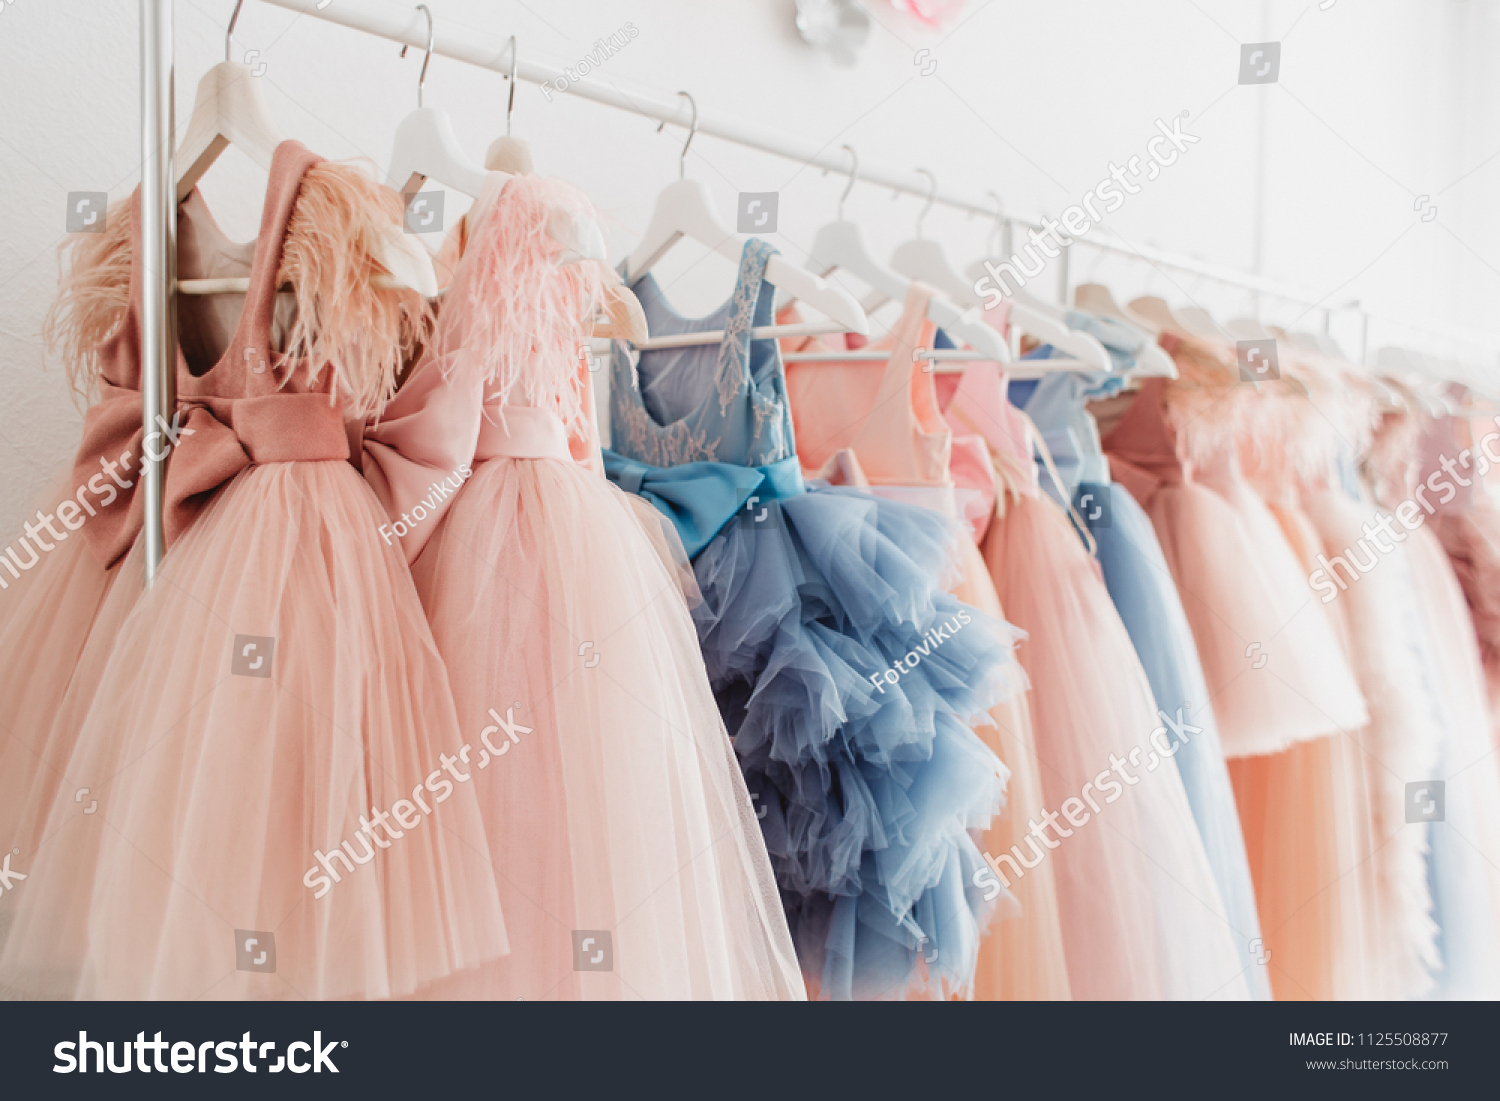 Beautiful dressy lush pink and blue dresses for girls on hangers at the background of white wall. Kids dresses with feathers for prom and holiday. #1125508877